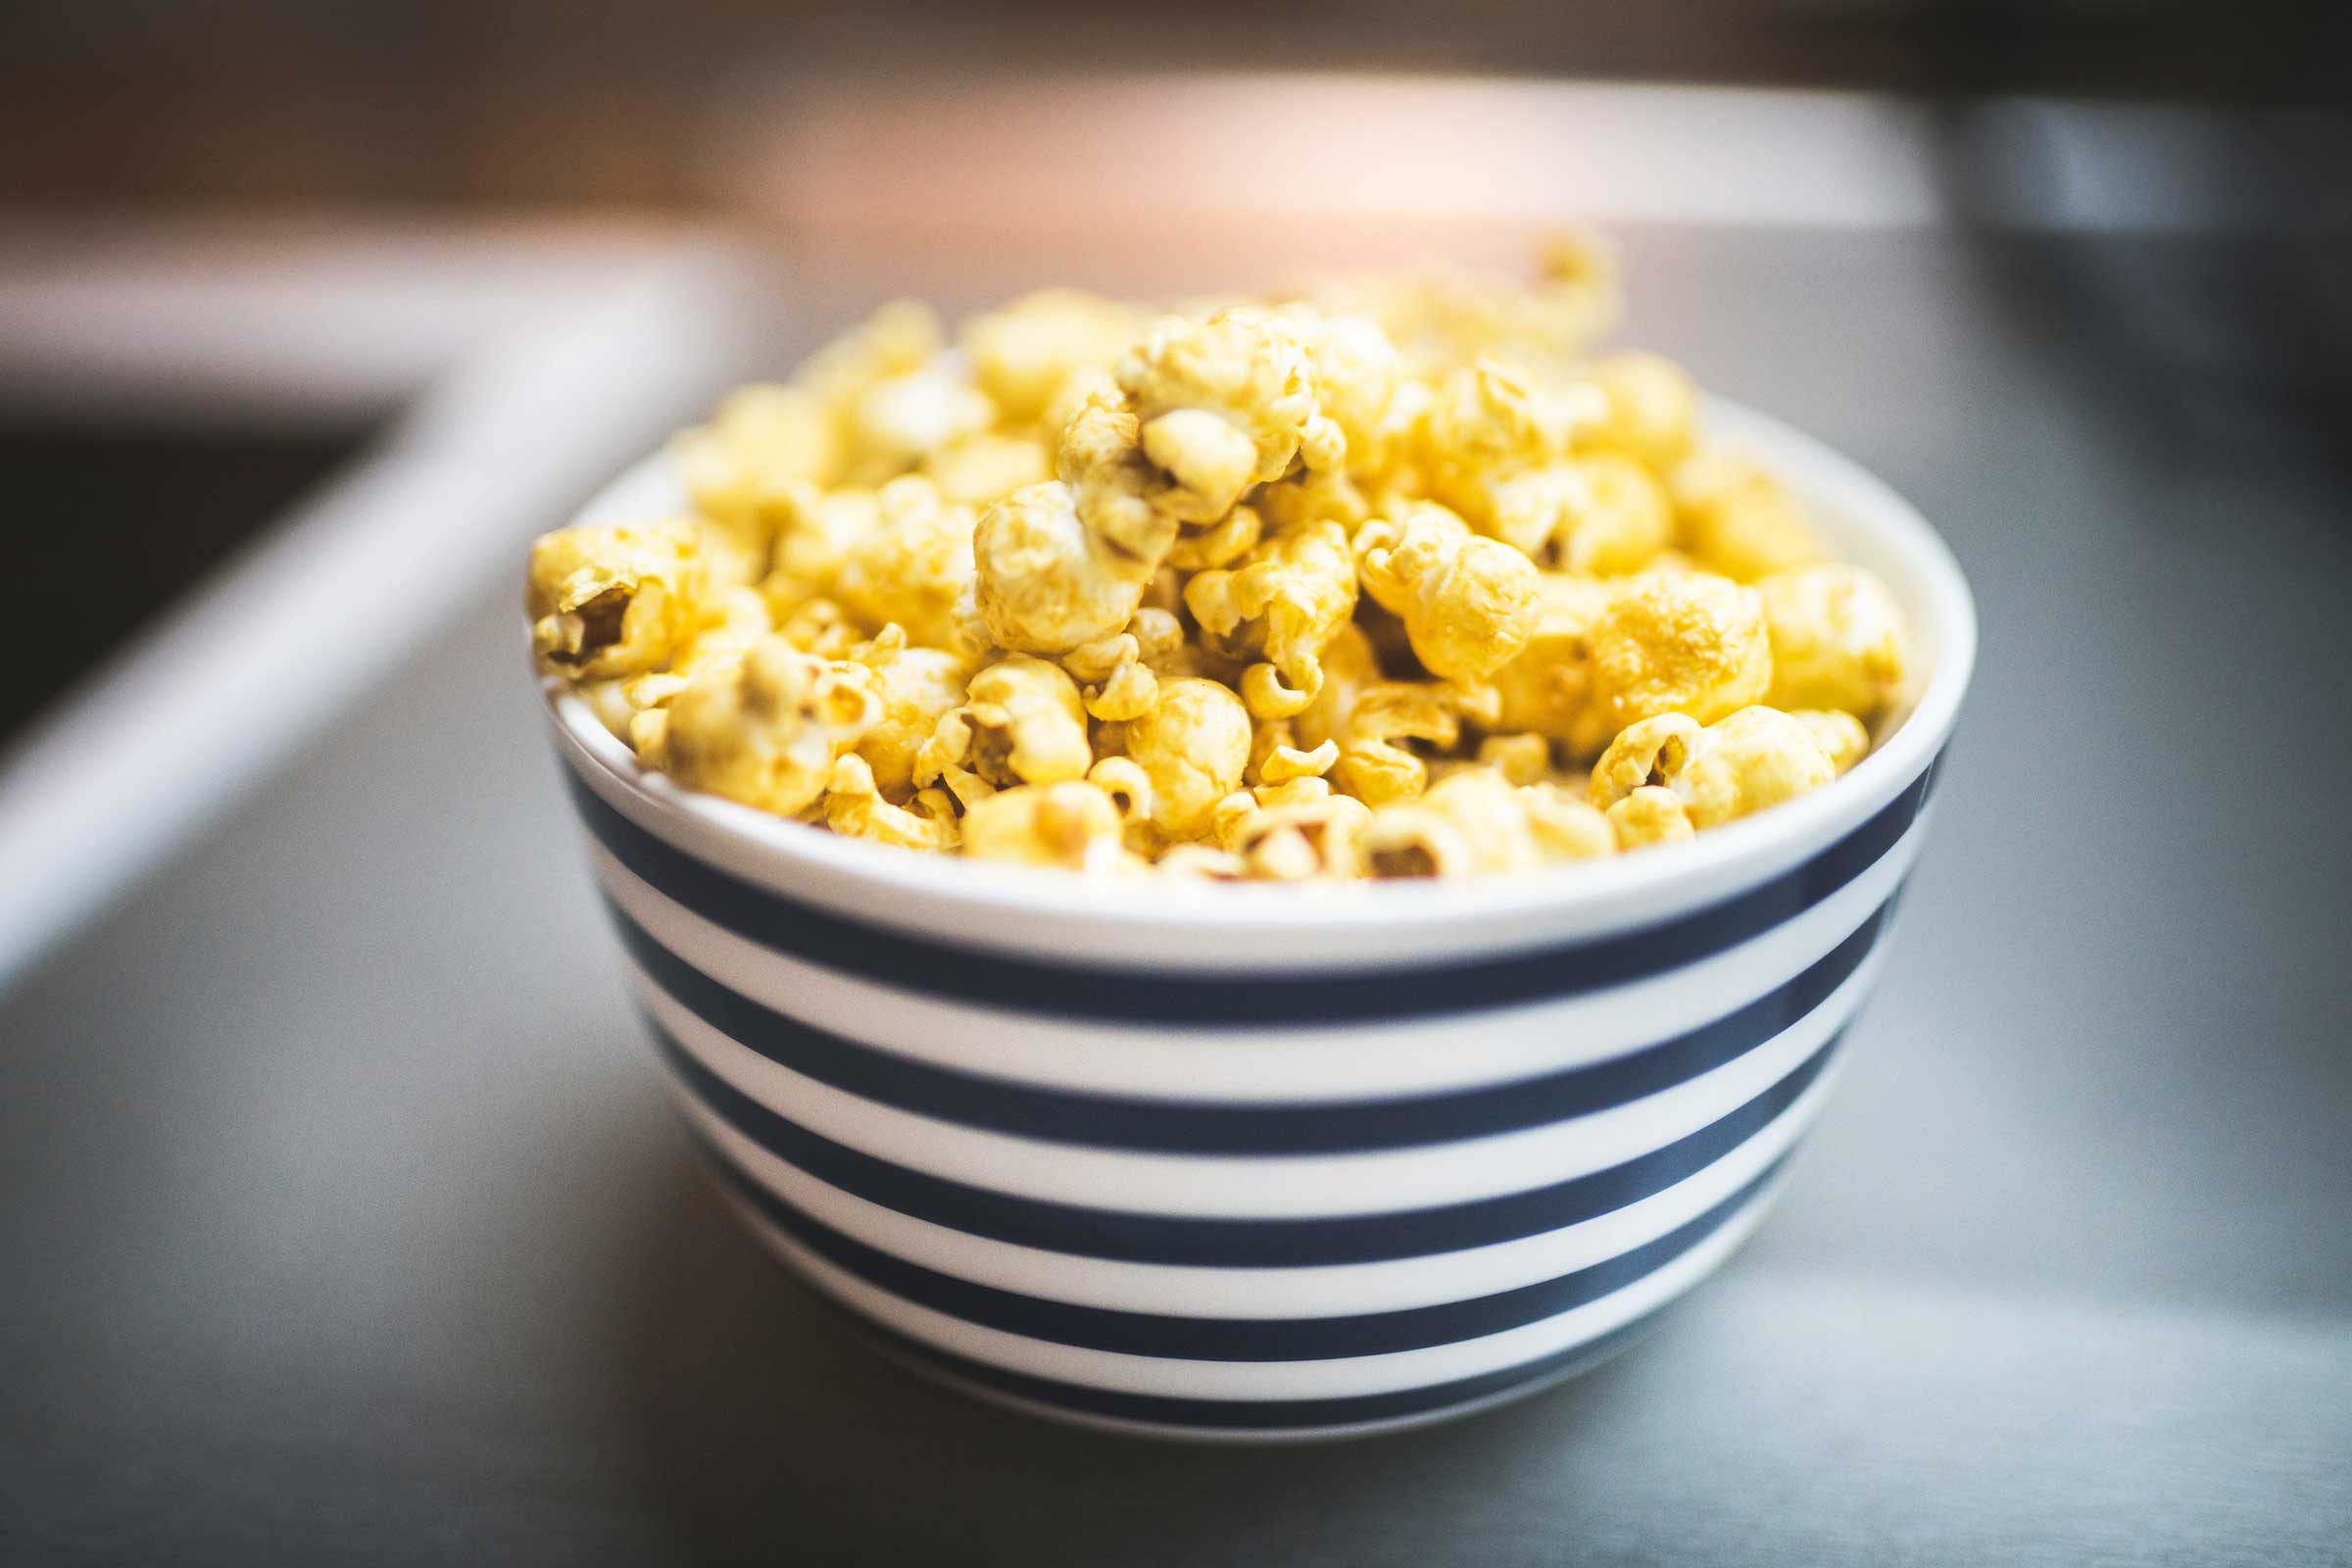 Is Popcorn Healthy? Here Are Top Reasons to Eat Popcorn